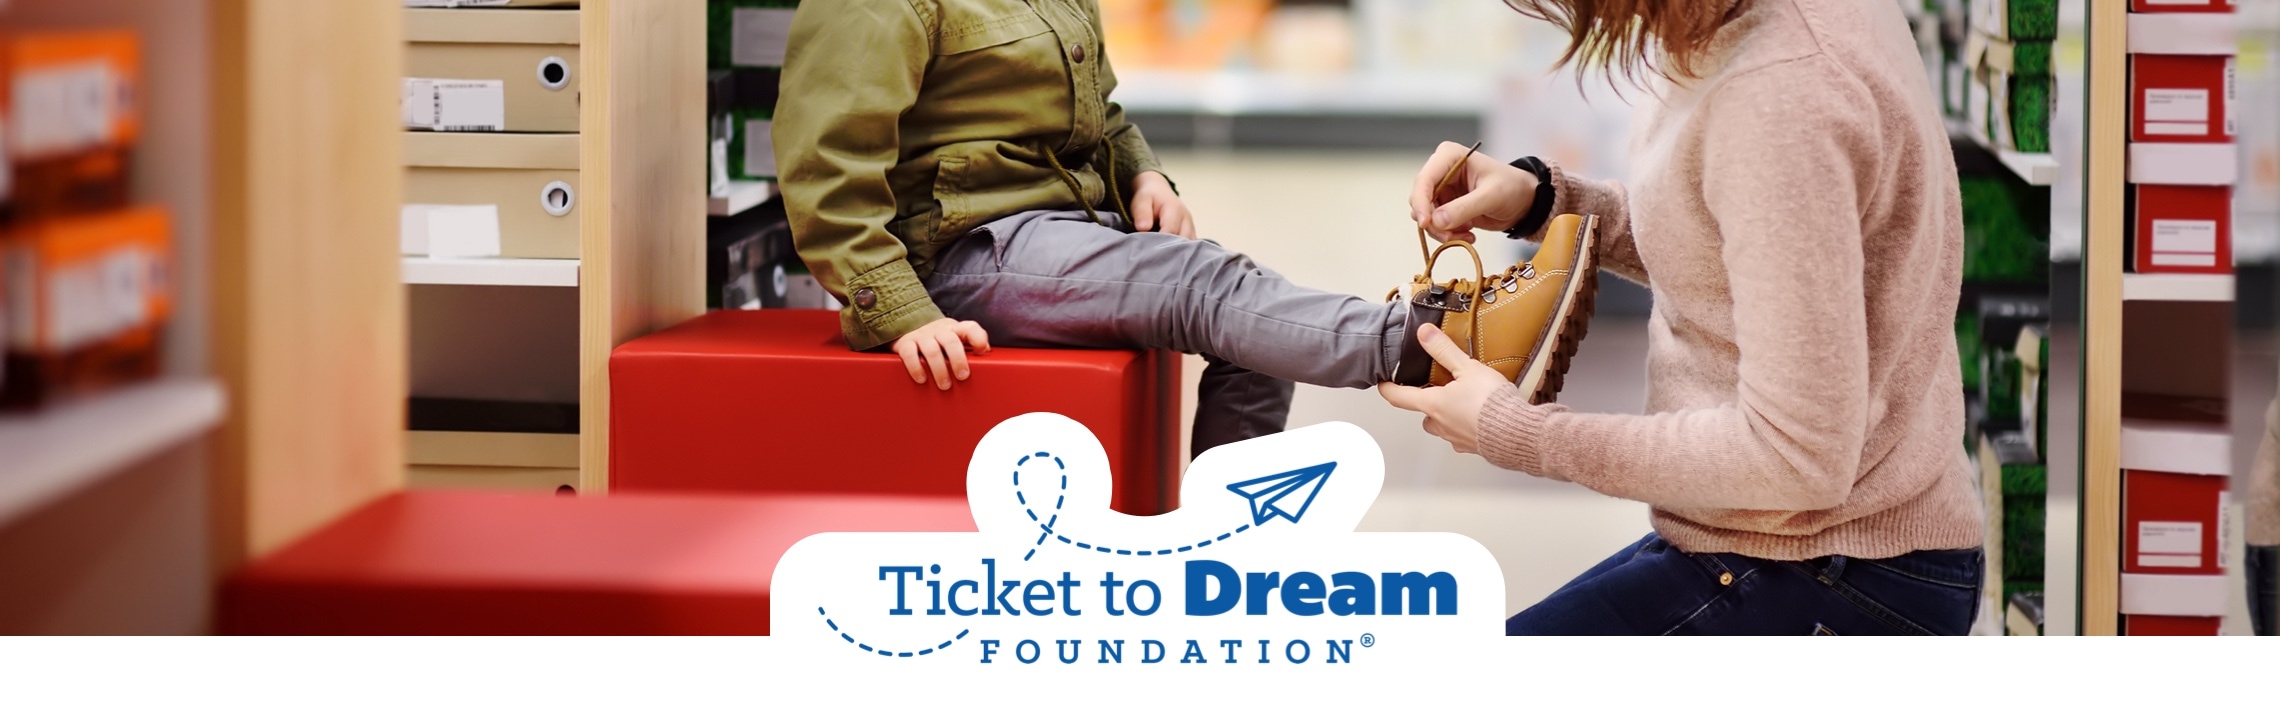 woman putting shoe on child in famous footwear store with ticket to dream foundation logo